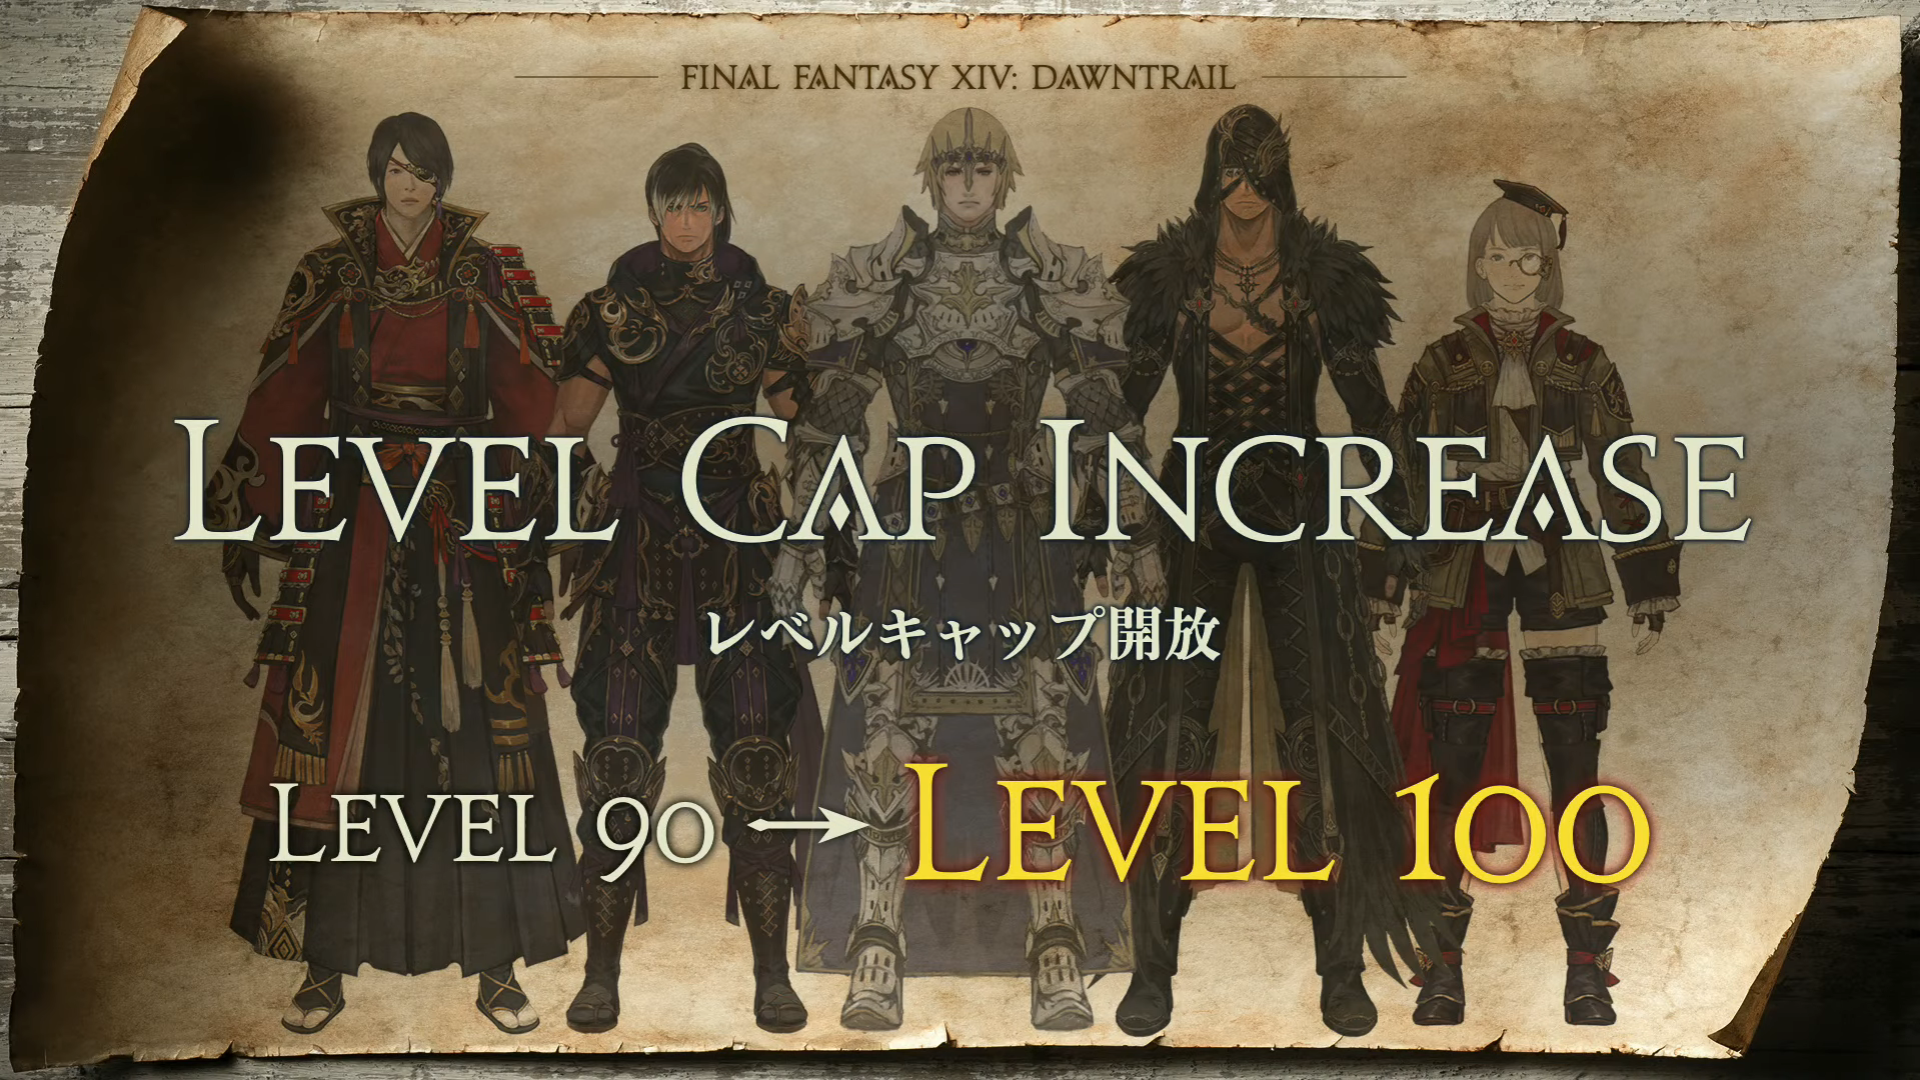 Final Fantasy 14 Dawntrail will increase level and job skill caps to 100